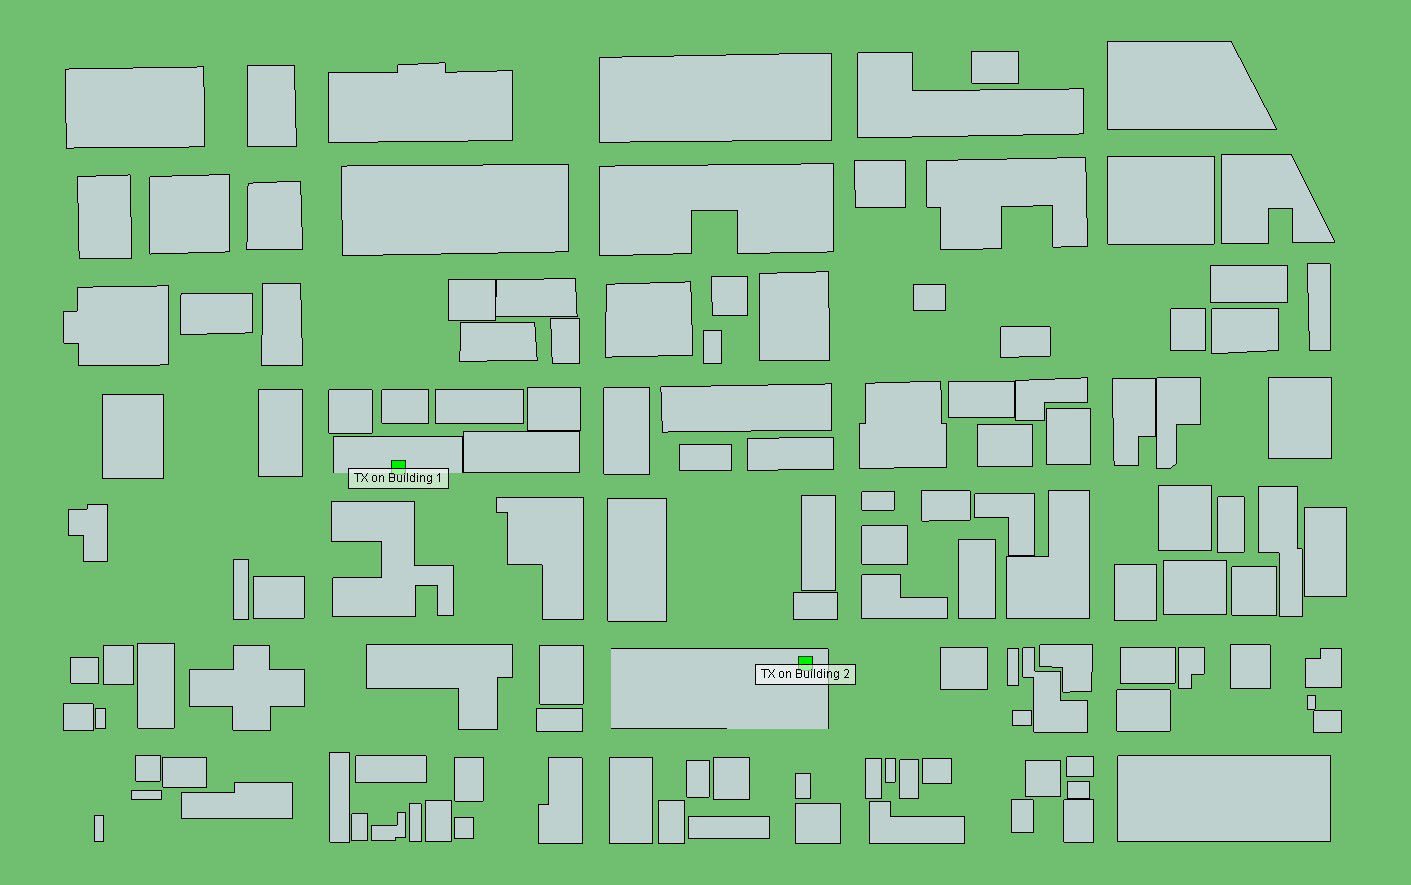 Figure 1Transmitter locations within an urban environment represented by green boxes.